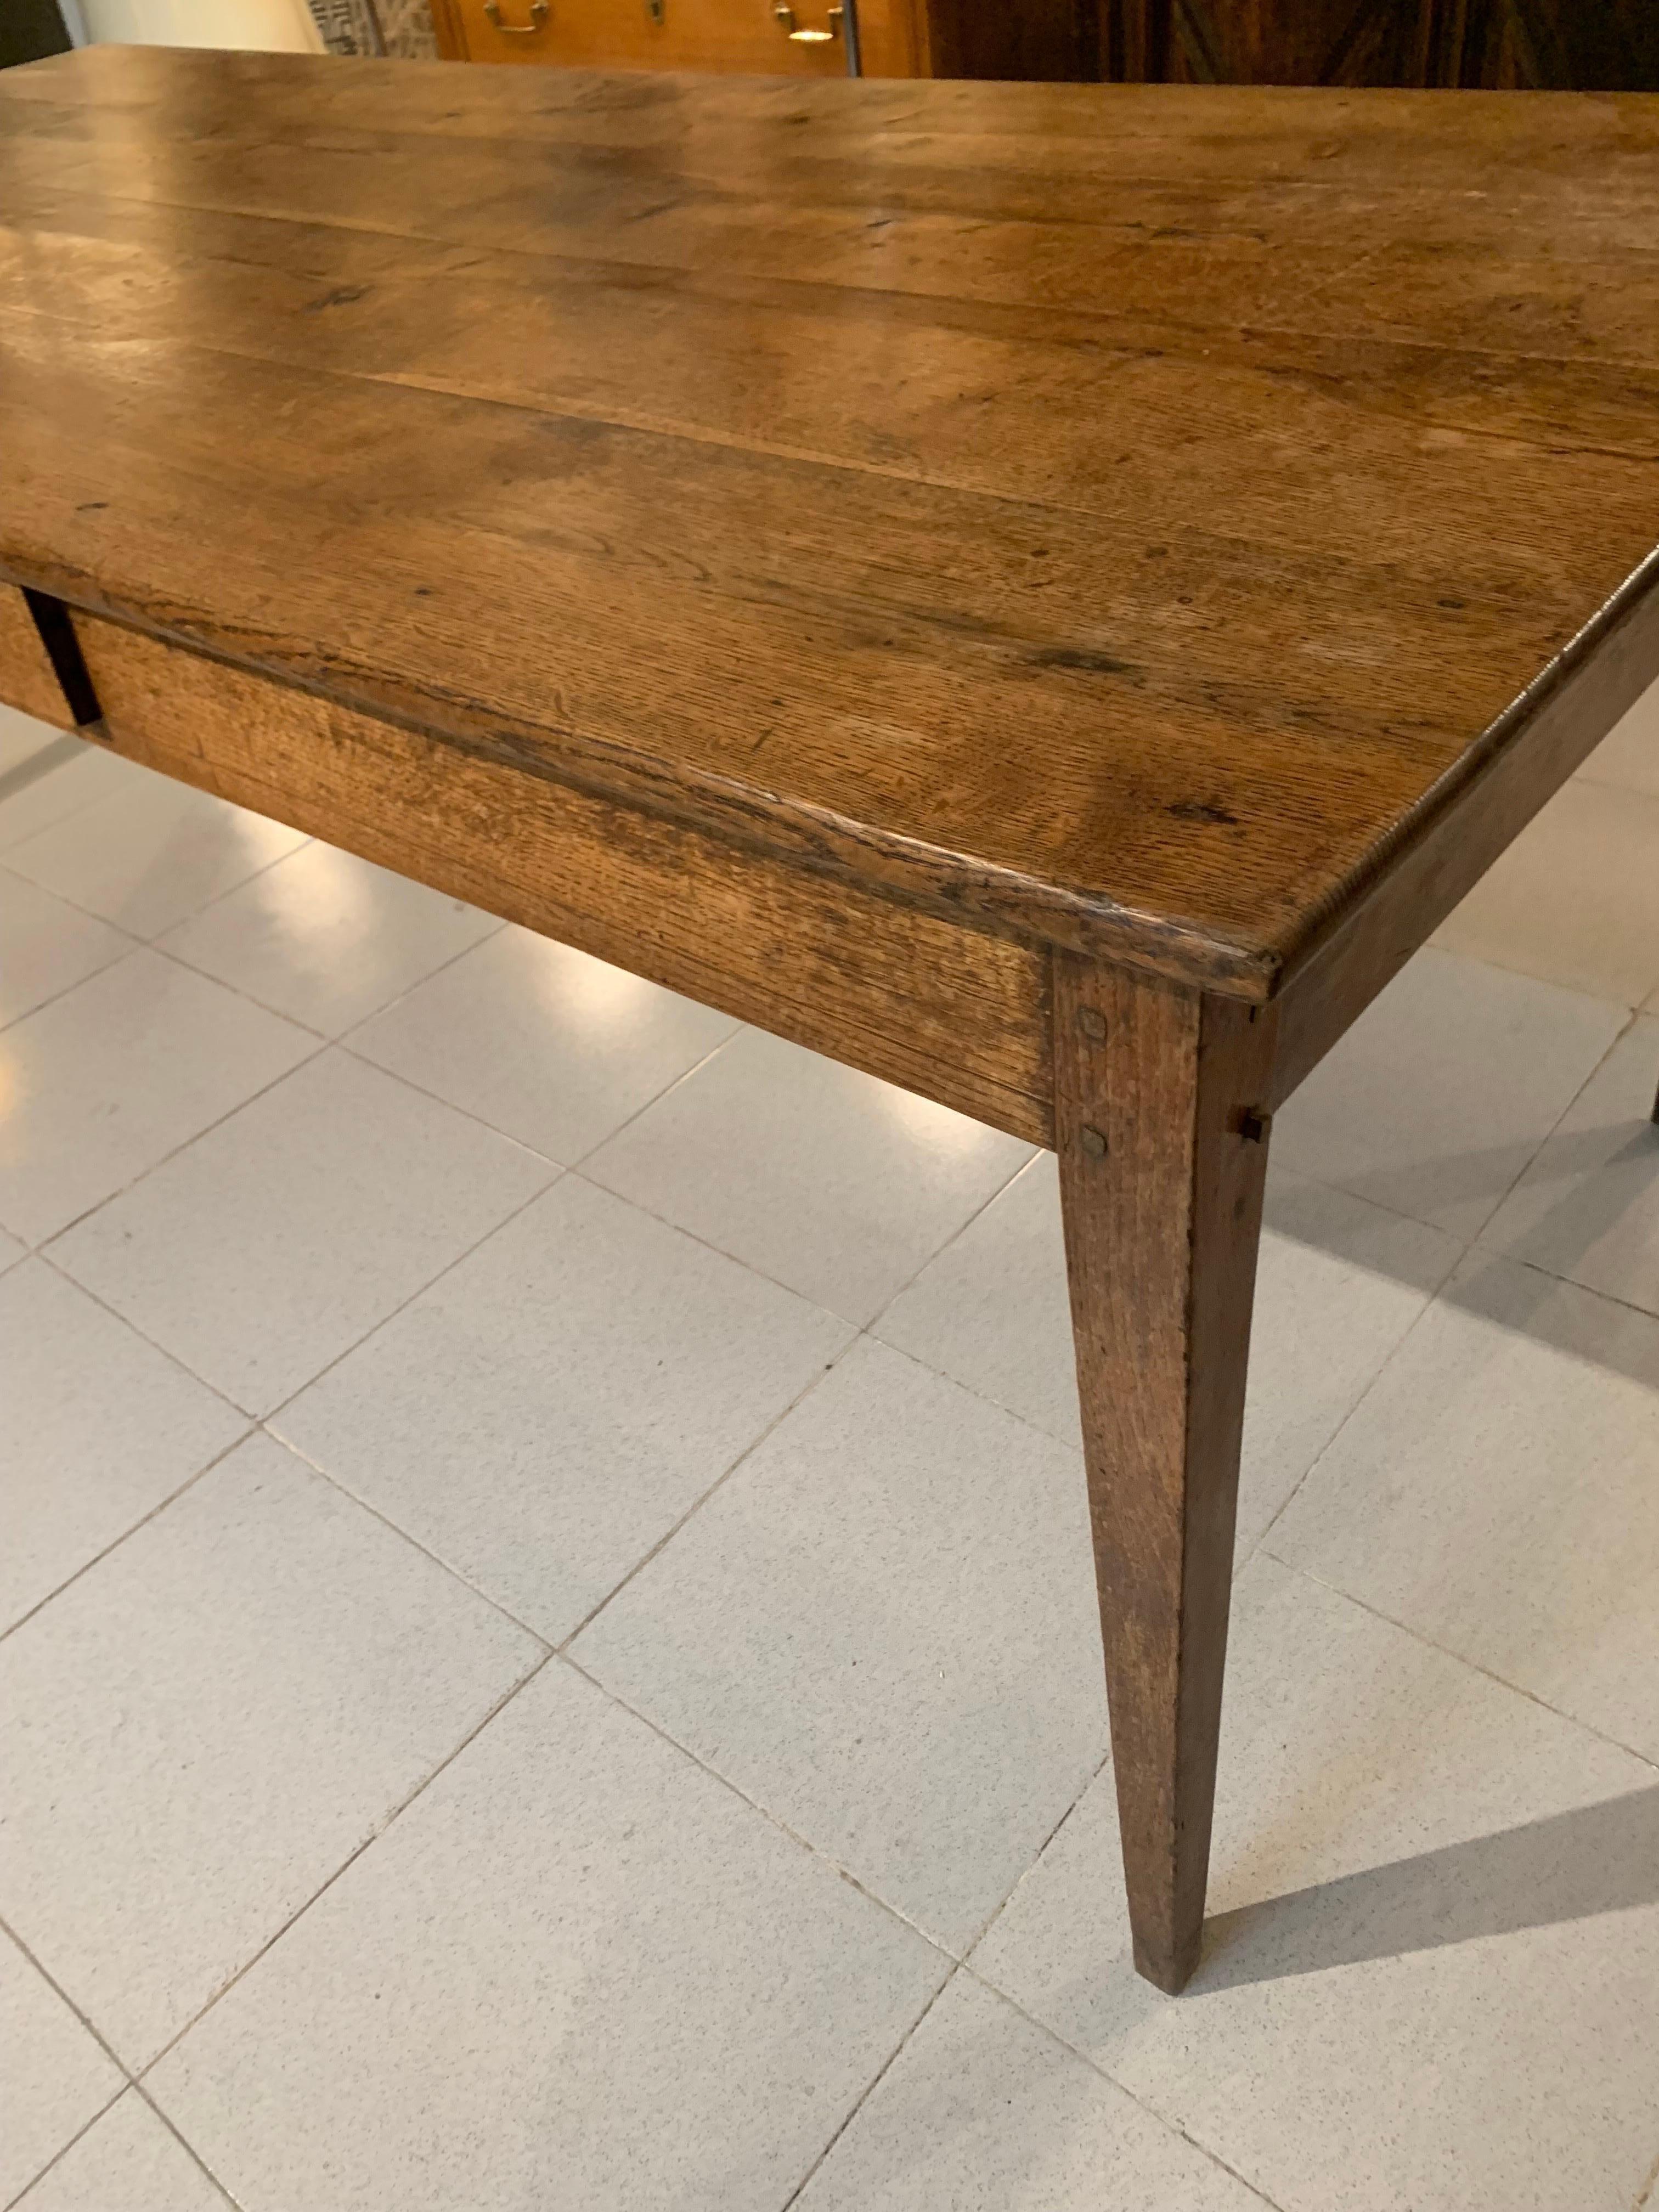 French farm table from the early 19th century, in oak wood, both the top and the legs, it is a very simple and elegant table with a small skirt and some conical legs, with a single drawer in the middle of the table, made with pegs, retains all its